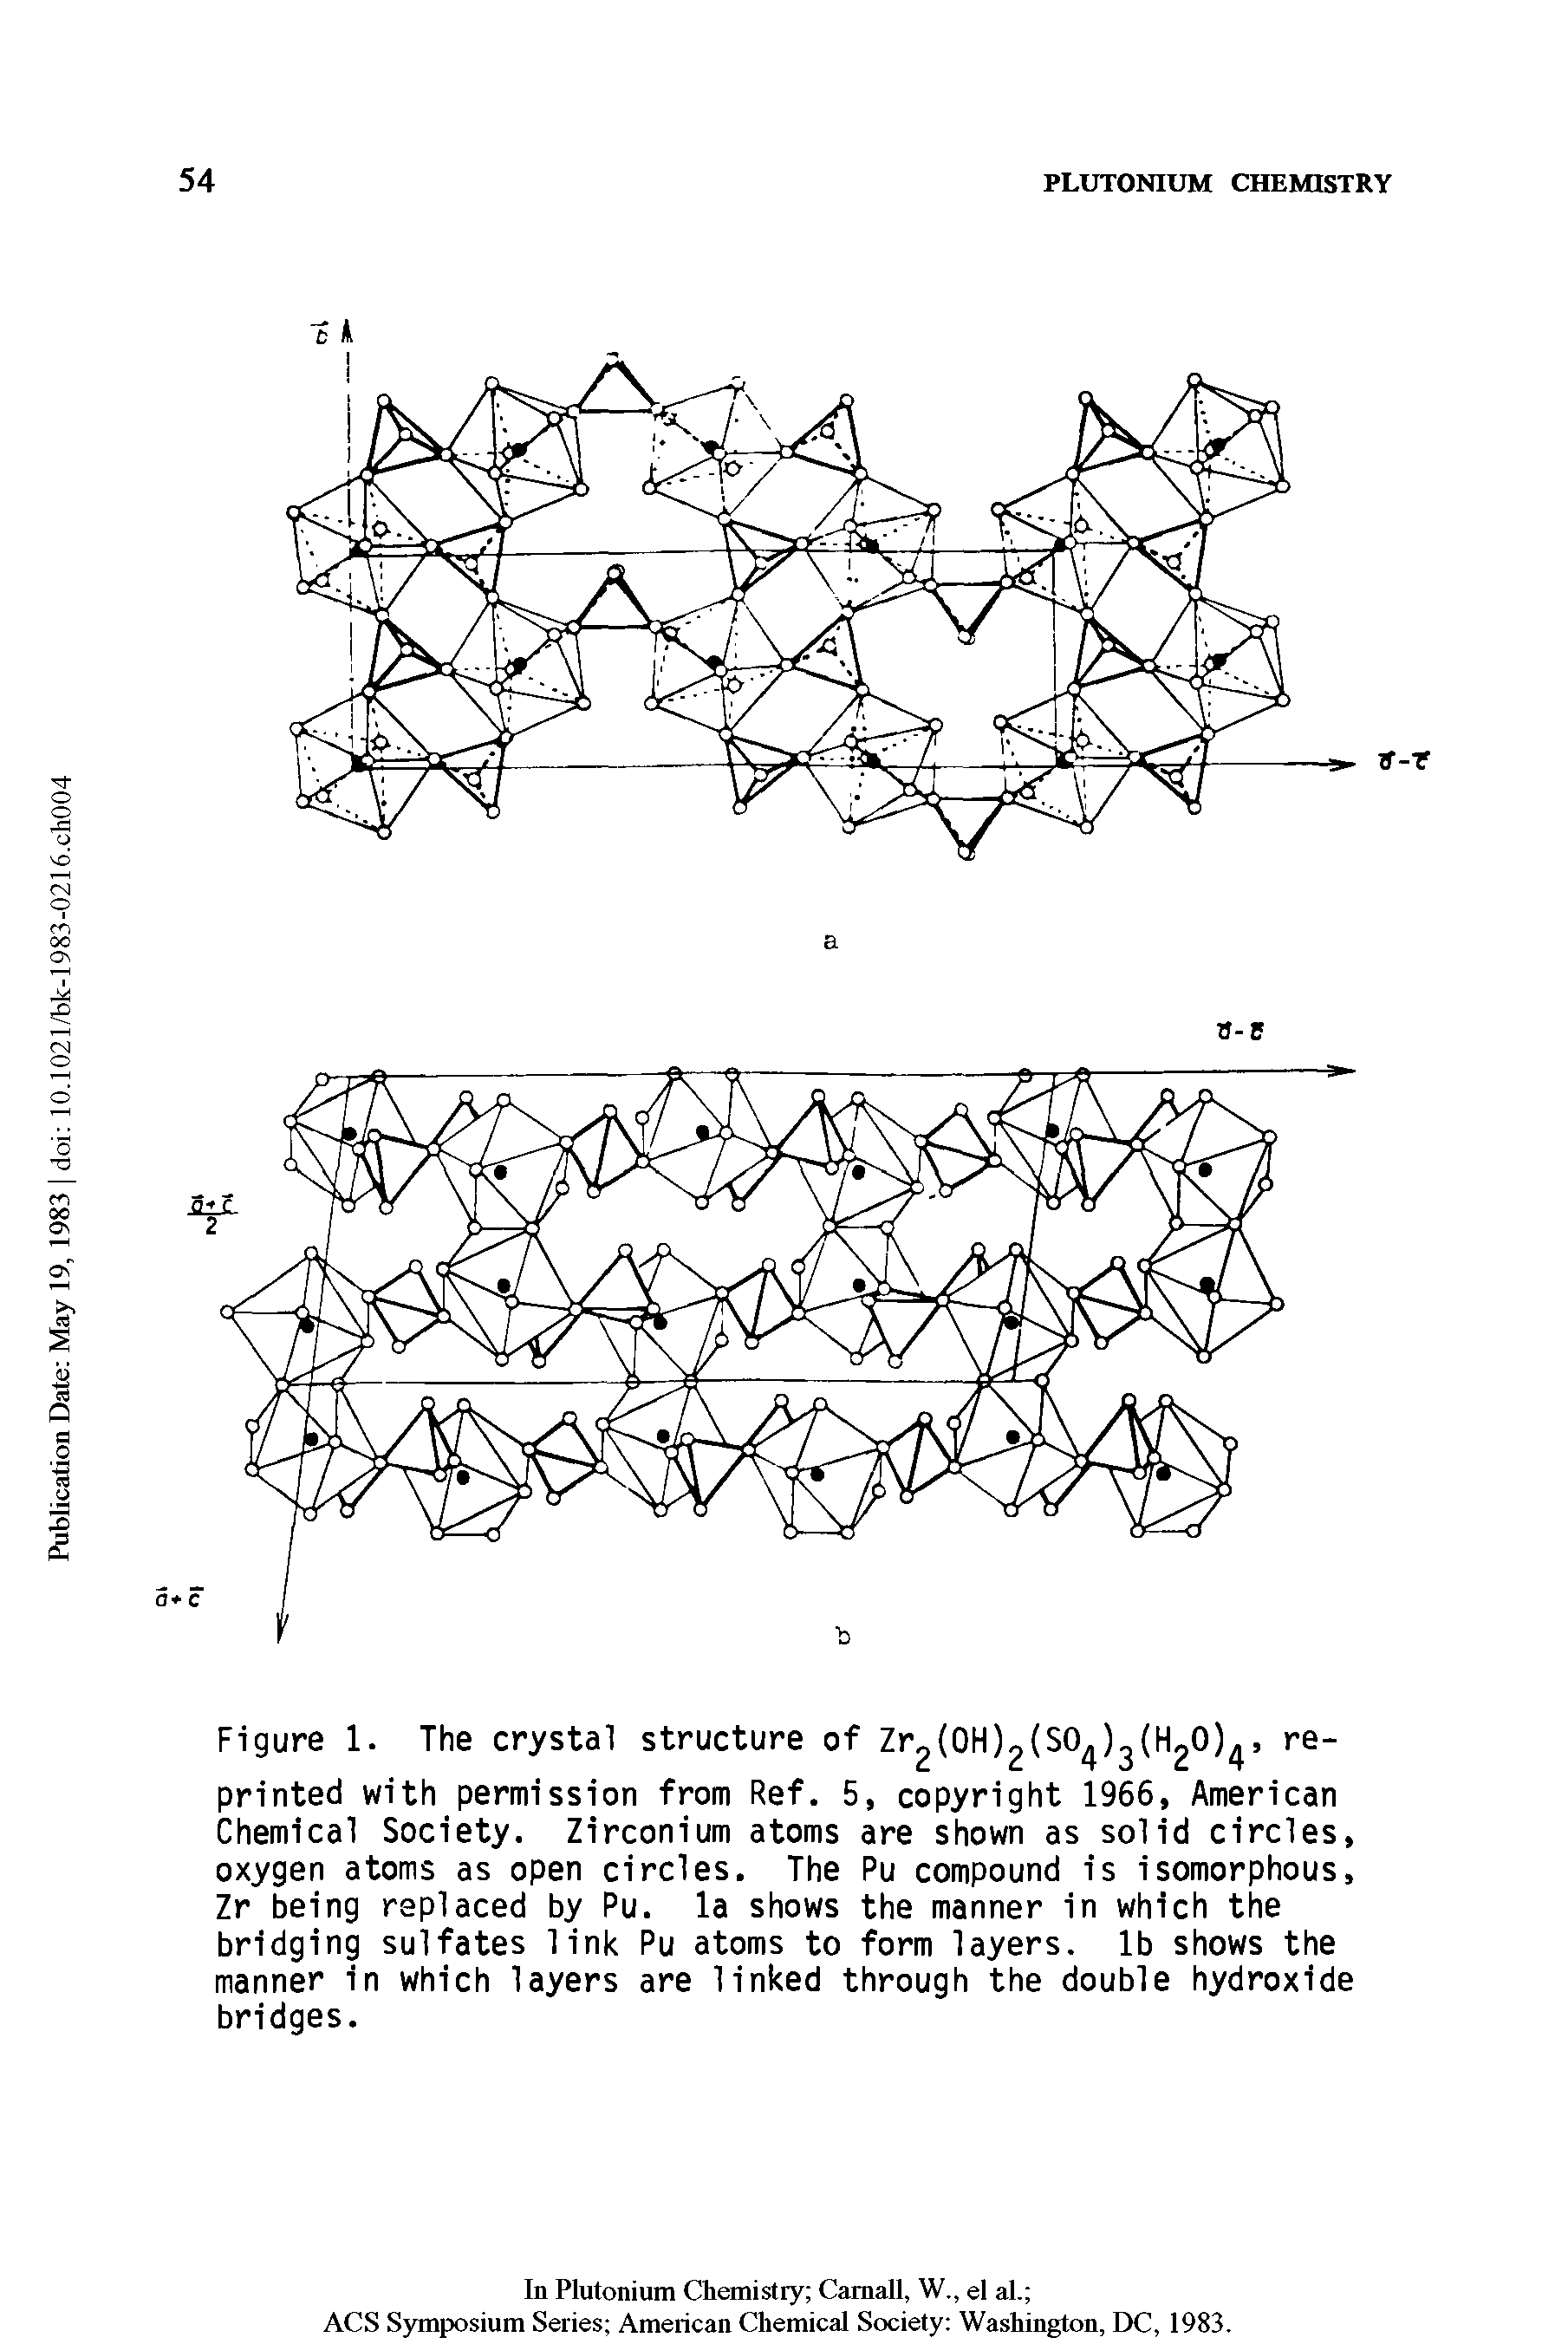 Figure 1. The crystal structure of Zr2(0H)2(SO4)3(H2O)4> reprinted with permission from Ref. 5, copyright 1966, American Chemical Society. Zirconium atoms are shown as solid circles, oxygen atoms as open circles. The Pu compound is isomorphous, Zr being replaced by Pu. la shows the manner in which the bridging sulfates link Pu atoms to form layers, lb shows the manner in which layers are linked through the double hydroxide bridges.